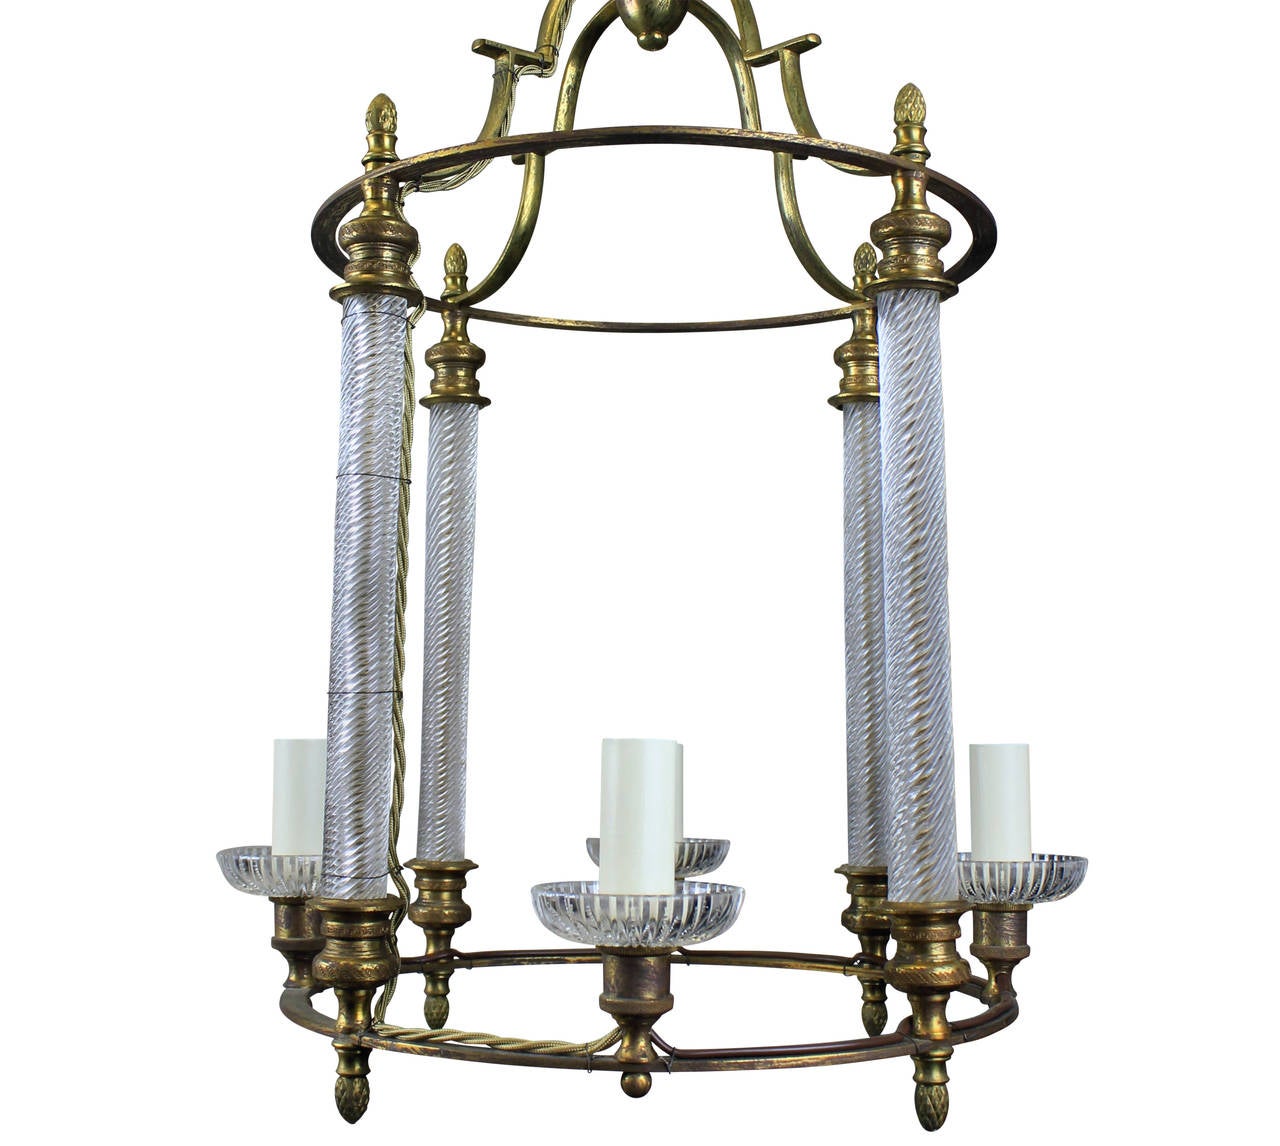 An Italian drum lantern in gilt bronze and glass, with barley twist columns and drip sconces.